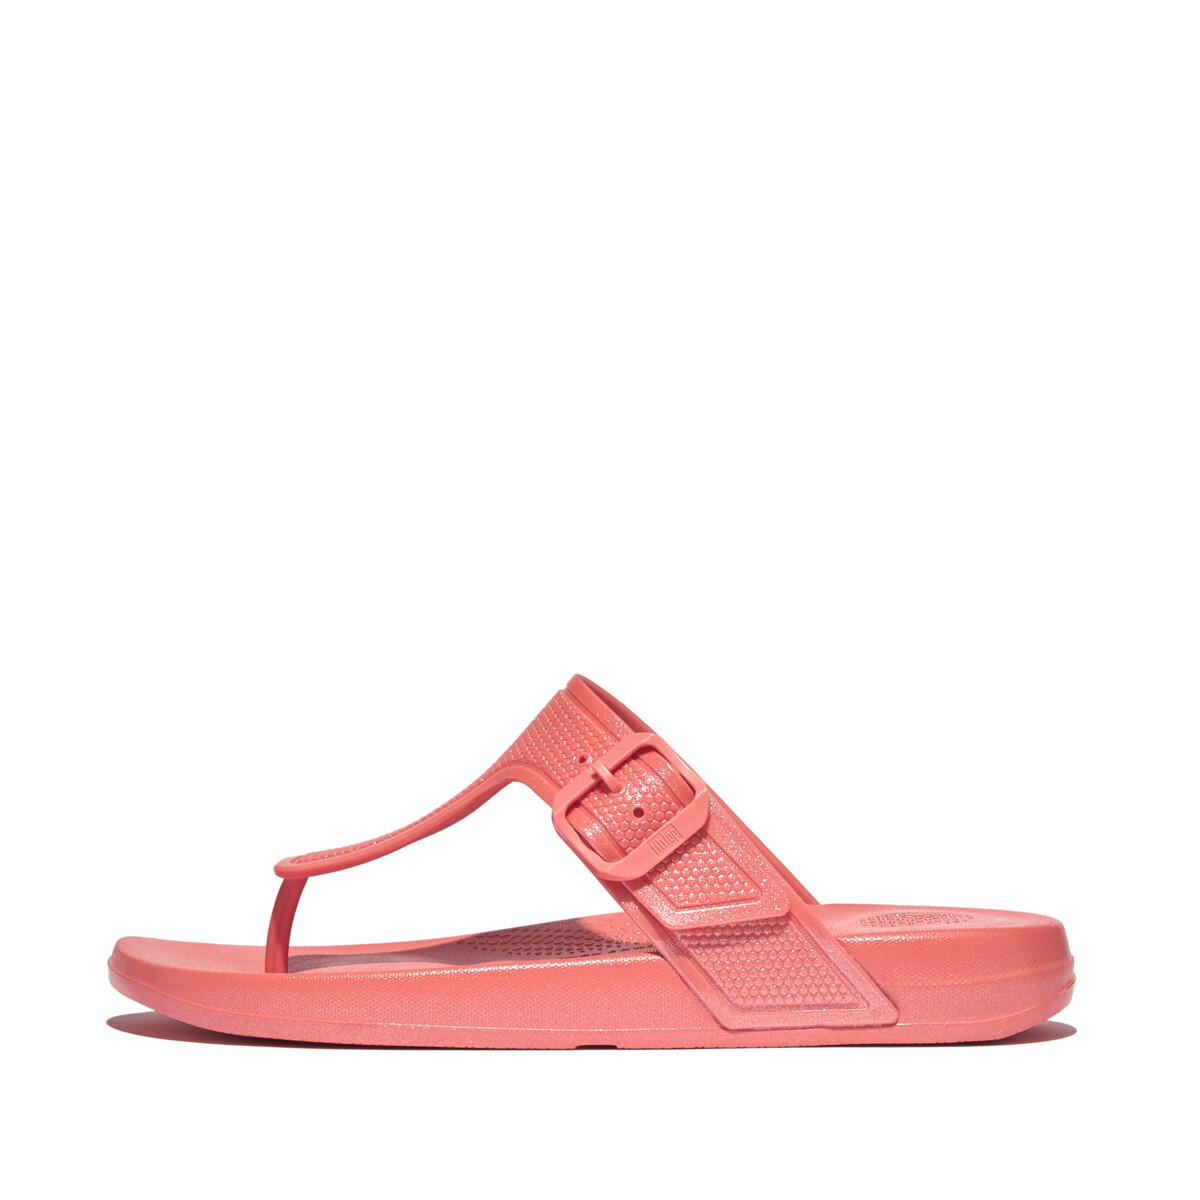 iQUSHION Pearlized Adjustable Buckle Flip-Flops - Pearlized Rosy Coral ...